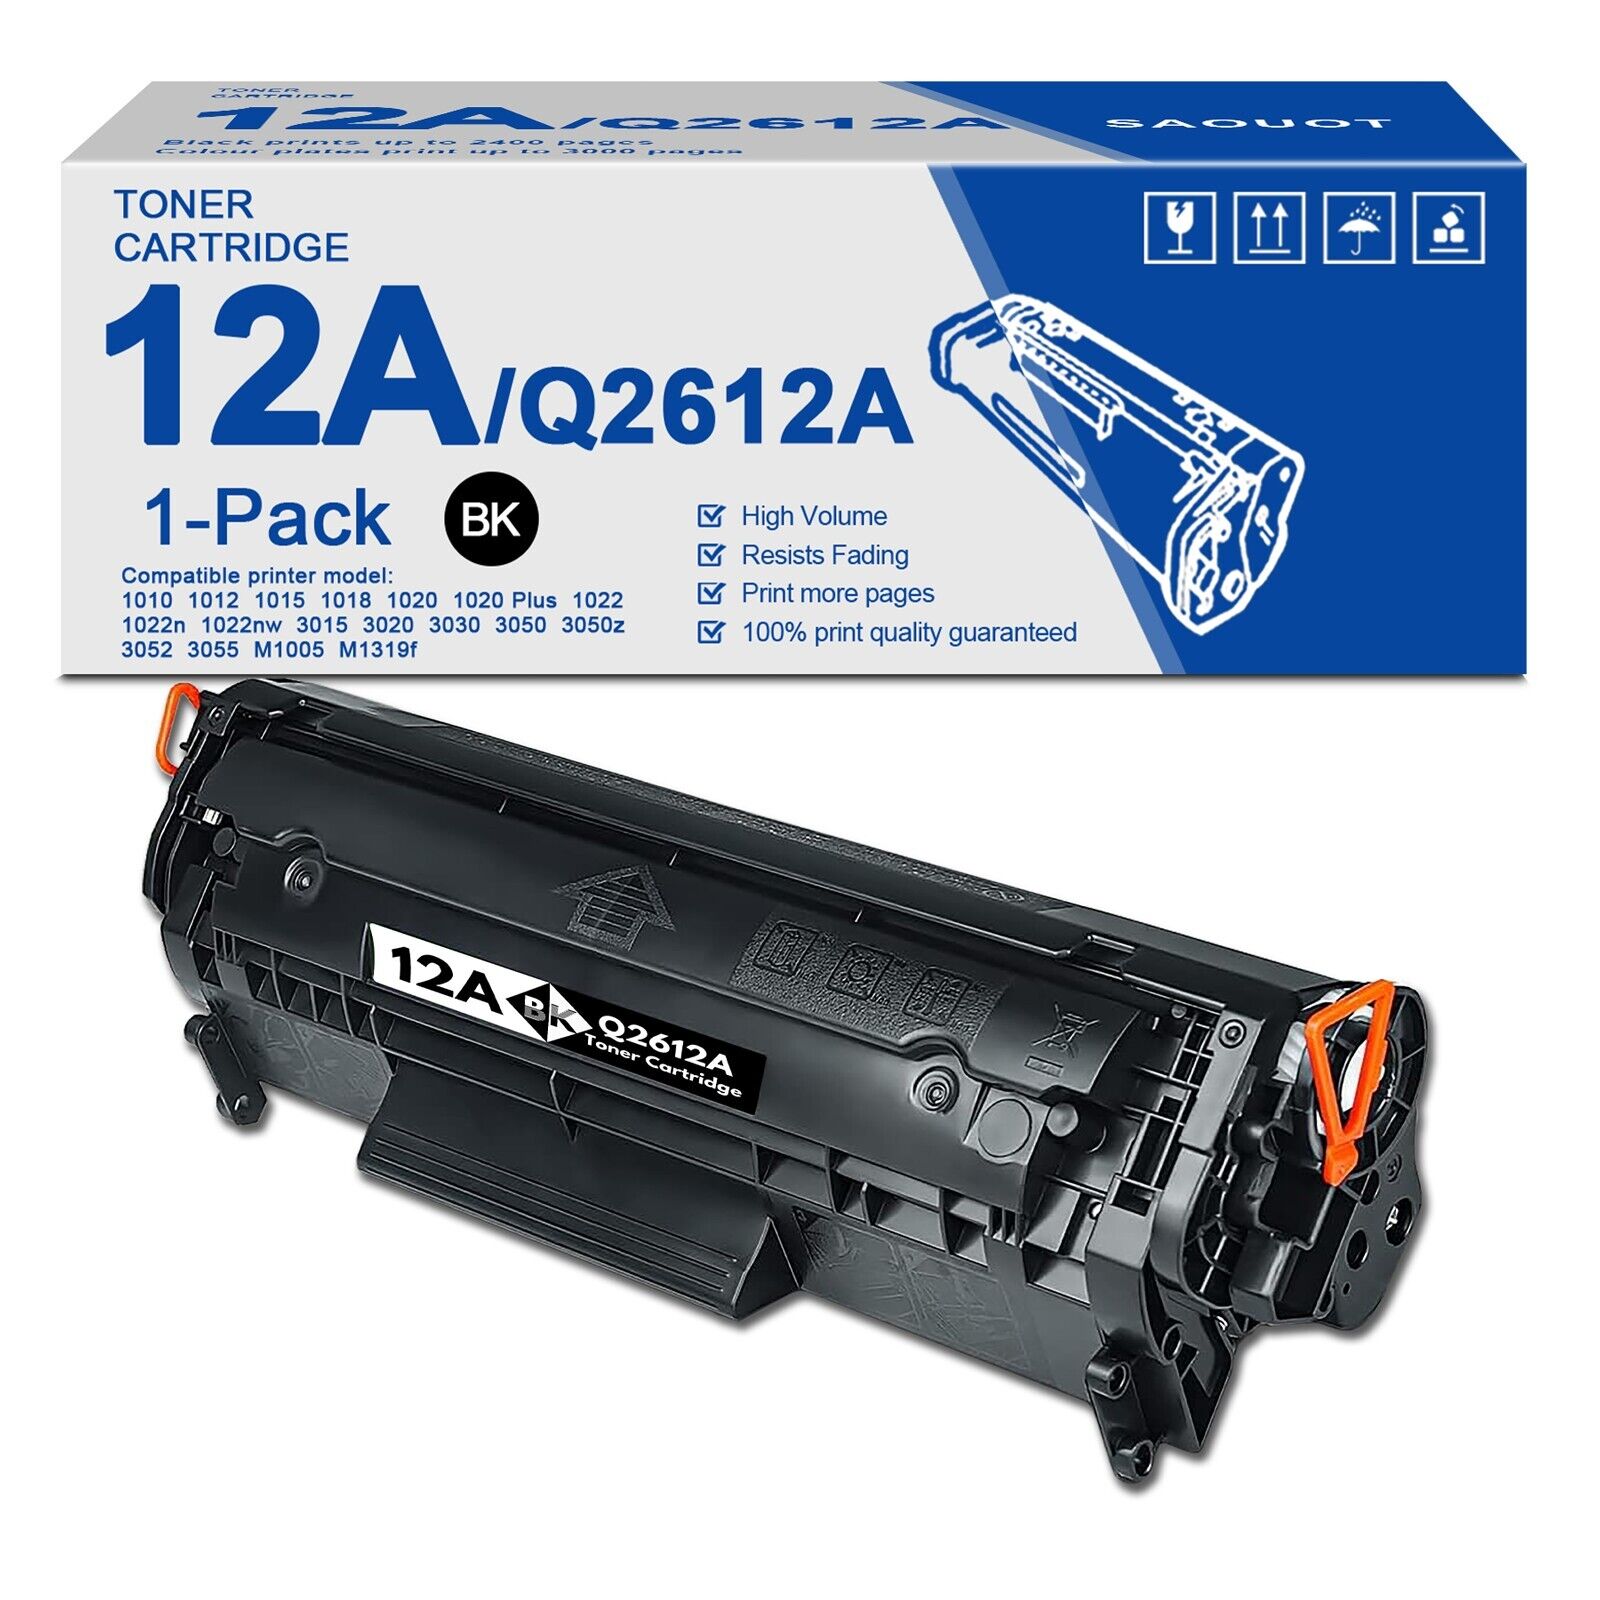 12A Toner Cartridge Replacement for HP 12A 1010 1020 3015, 1 Black | Q2612A